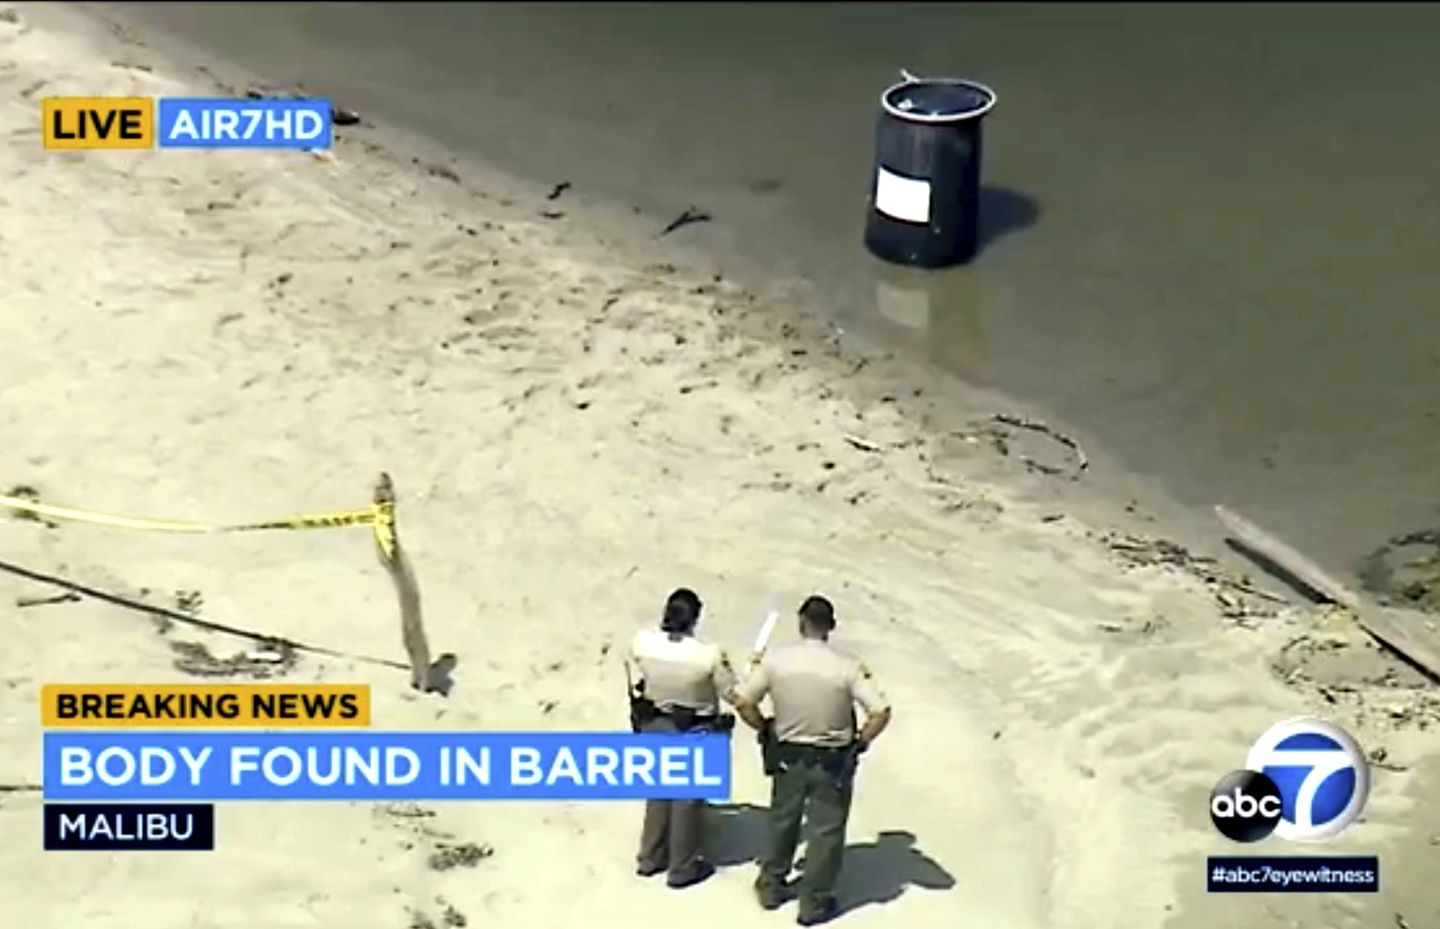 Man whose body was found in a barrel in Malibu had been shot in the head, coroner says